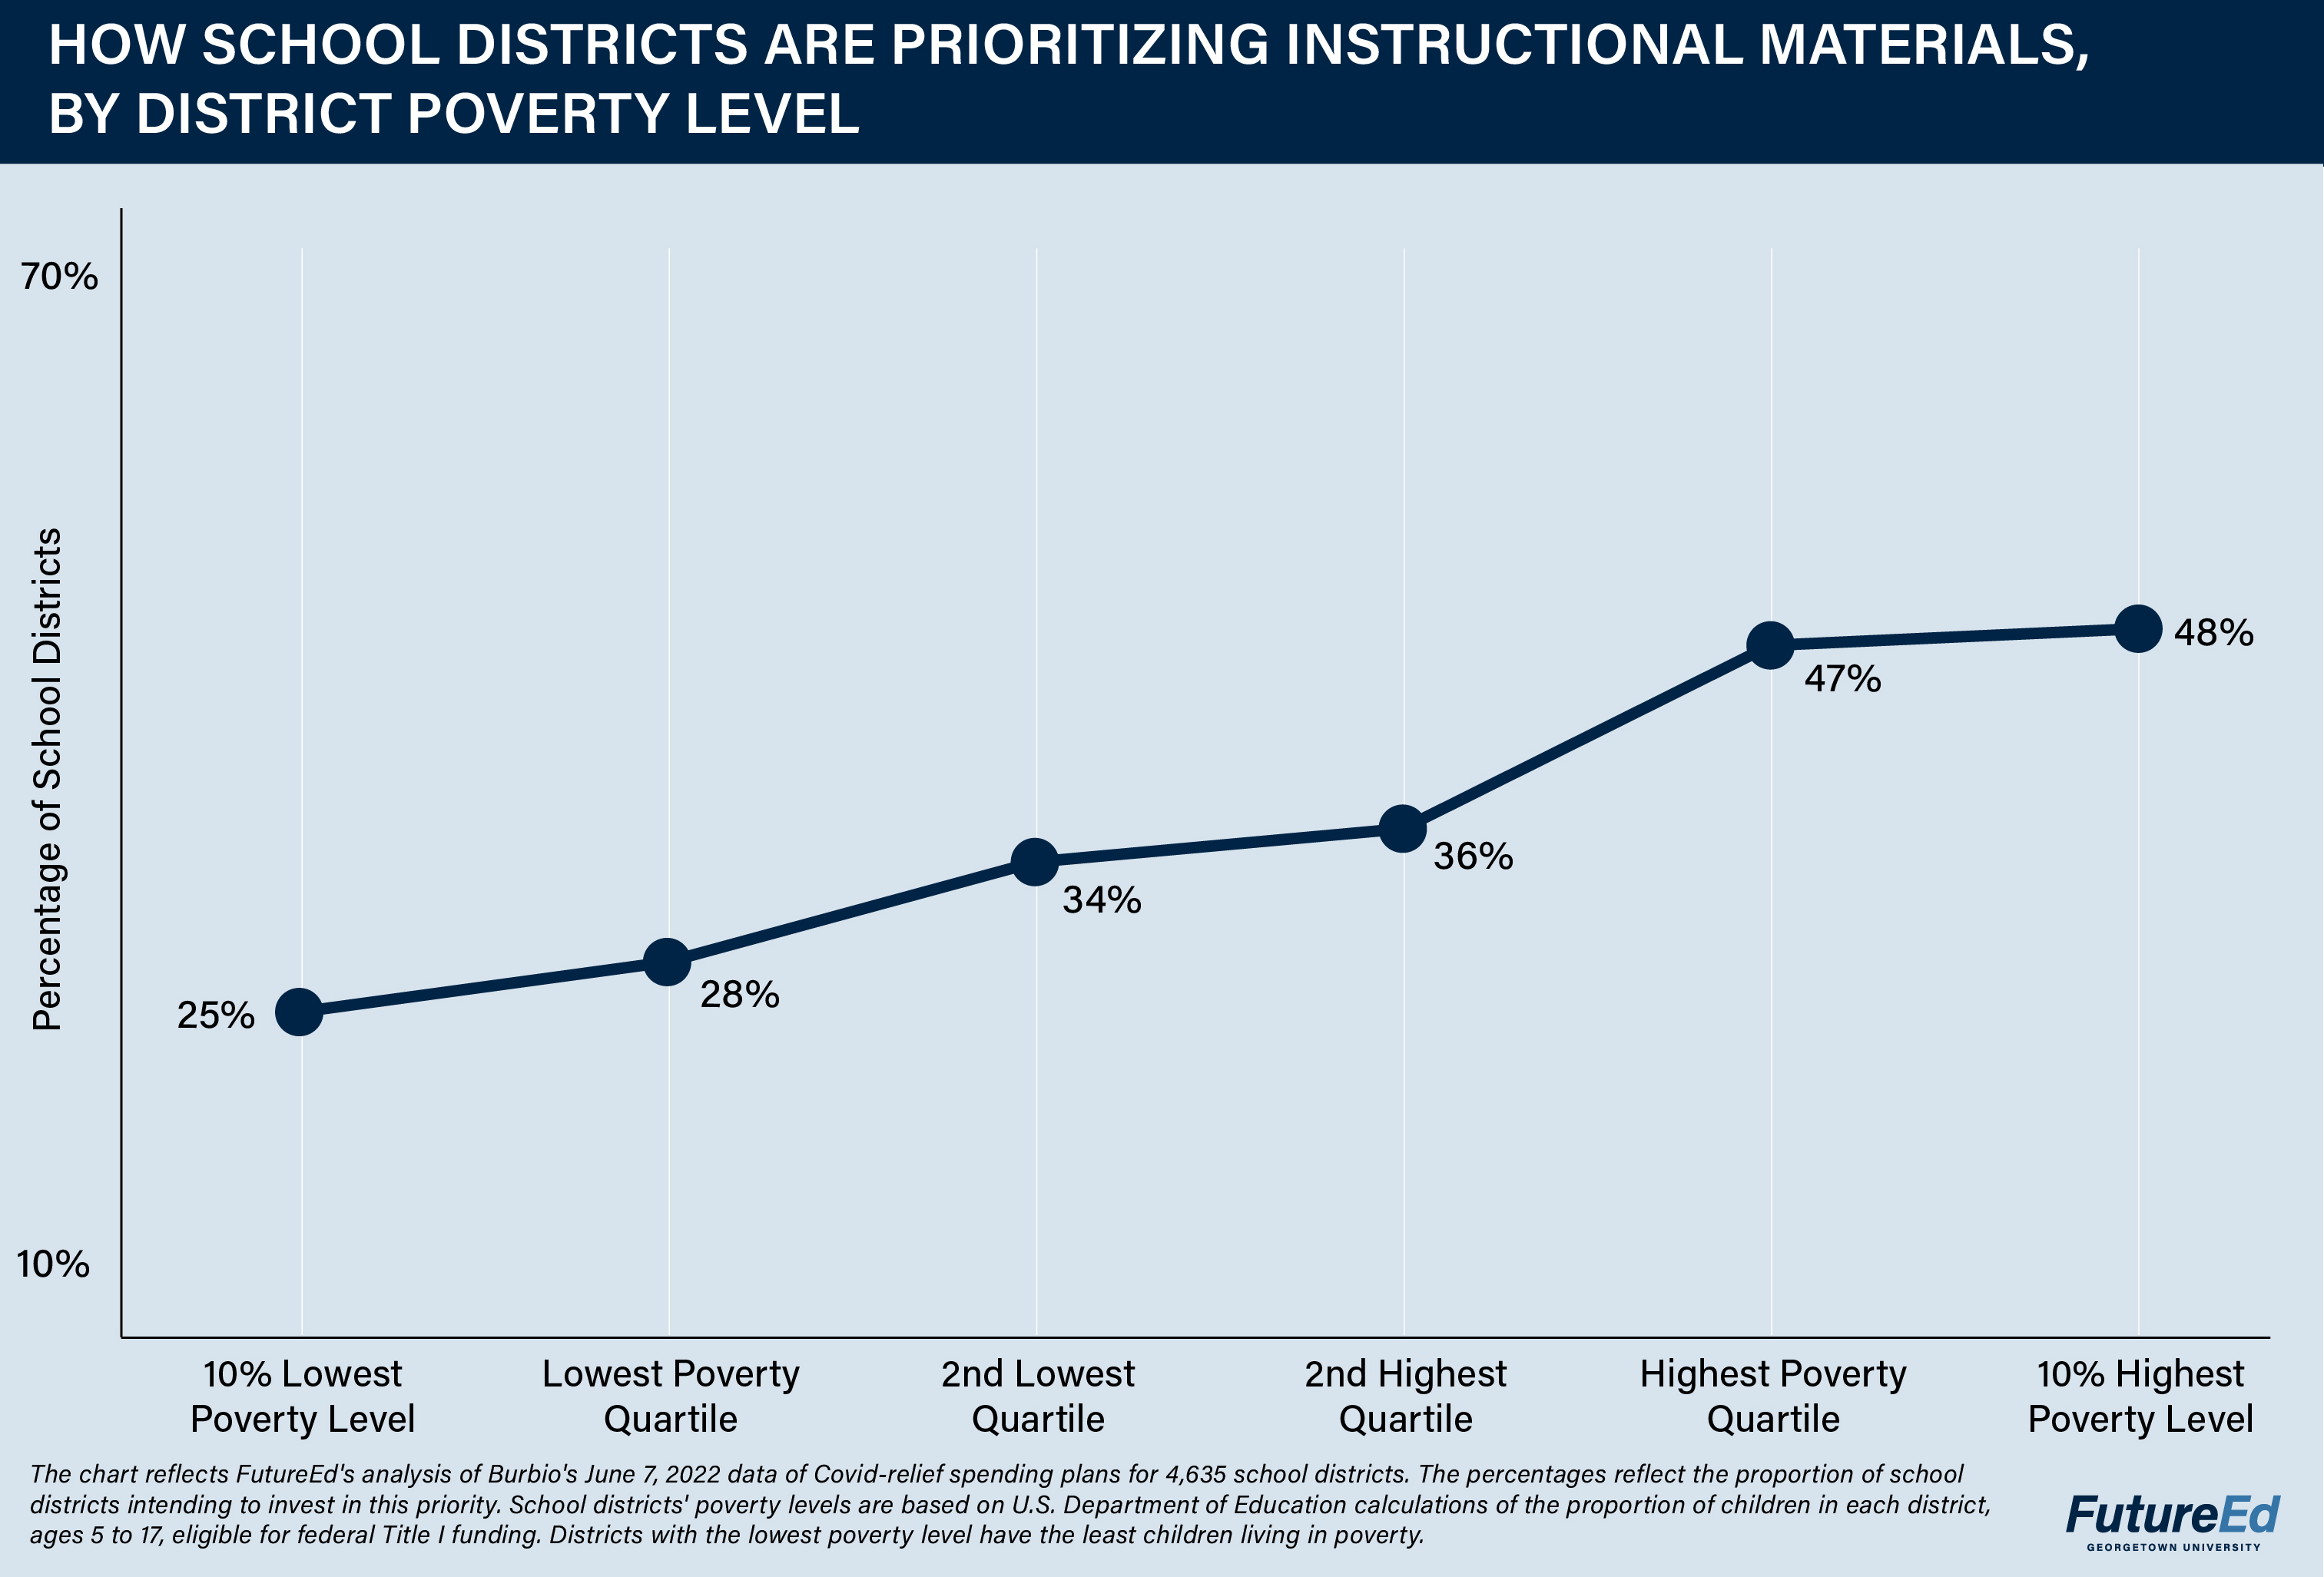 Chart: How School Districts are Prioritizing Instructional Materials, by District Poverty Level. Percentage of school districts. 10% lowest poverty level: 25%. Lowest poverty quartile: 28%. 2nd lowest quartile: 34%. 2nd highest quartile: 36%. Highest poverty quartile: 47%. 10% highest poverty level: 48%. (The chart reflects FutureEd's analysis of Burbio's June 7, 2022 data of Covid-relief spending plans for 4,635 school districts. The percentages reflect the proportion of school districts intending to invest in this priority. School districts' poverty levels are based on U.S. Department of Education calculations of the proportion of children in each district, ages 5 to 17, eligible for federal Title I funding. Districts with the lowest poverty level have the least children living in poverty.)